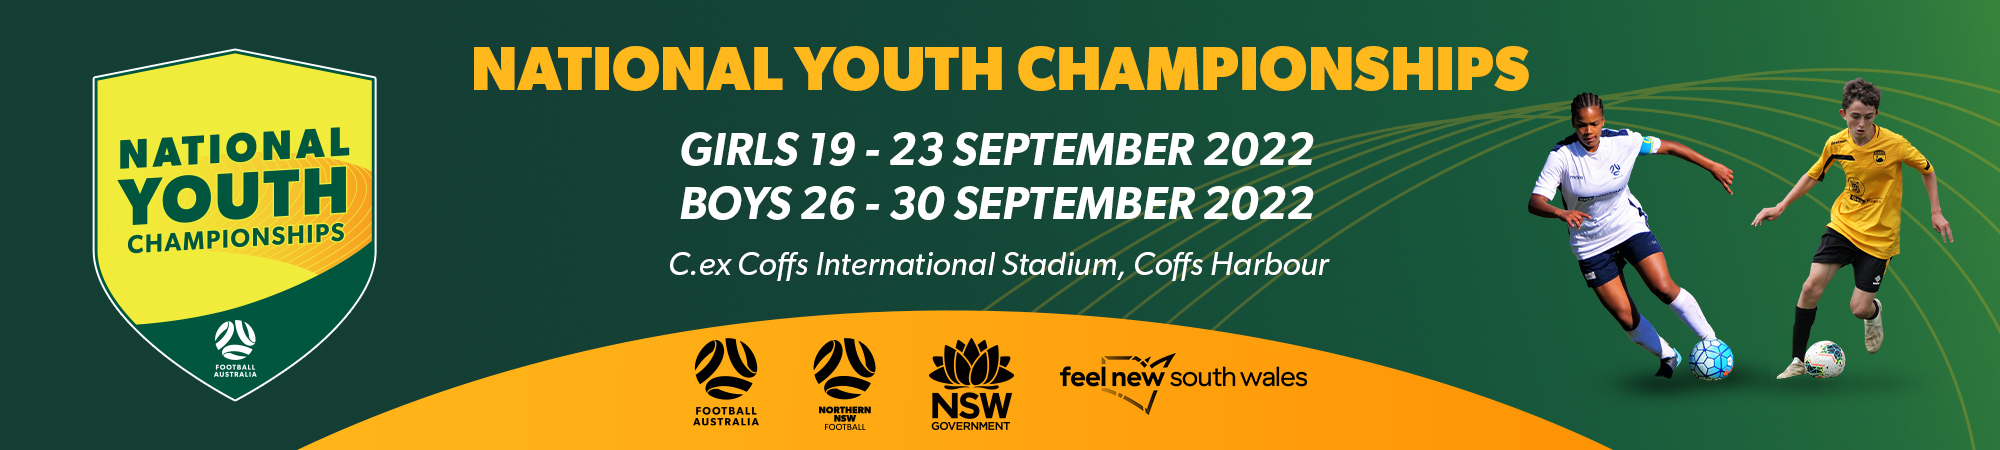 National Youth Championships 2022 - Coffs Harbour